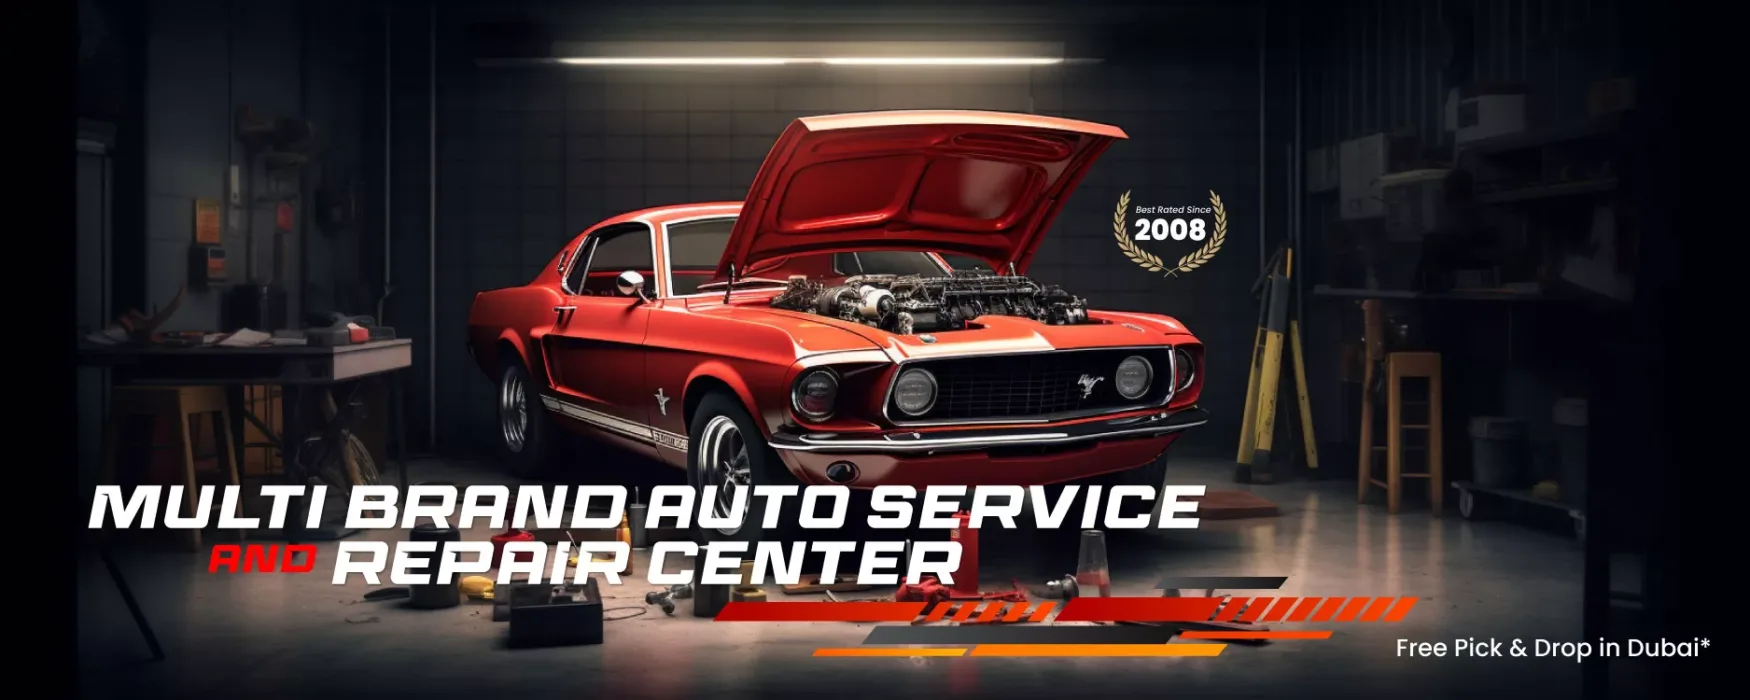 Best rated Car Services and Repair